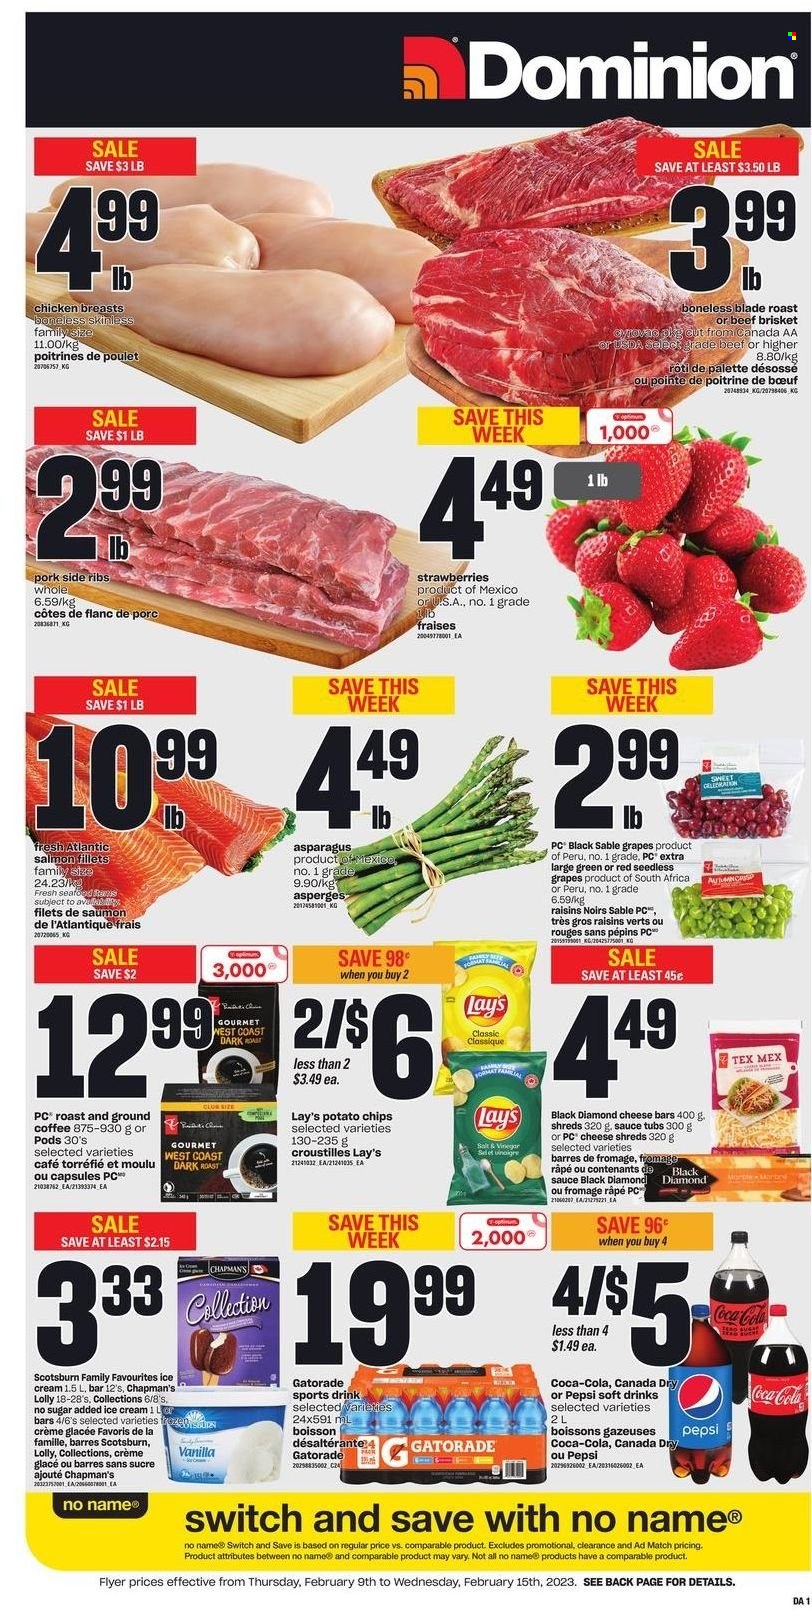 thumbnail - Dominion Flyer - February 09, 2023 - February 15, 2023 - Sales products - asparagus, grapes, seedless grapes, strawberries, salmon, salmon fillet, seafood, No Name, sauce, ice cream, lollipop, potato chips, chips, Lay’s, dried fruit, Canada Dry, Coca-Cola, Pepsi, soft drink, Gatorade, coffee, chicken breasts, beef meat, beef brisket, ribs, Palette, raisins. Page 1.